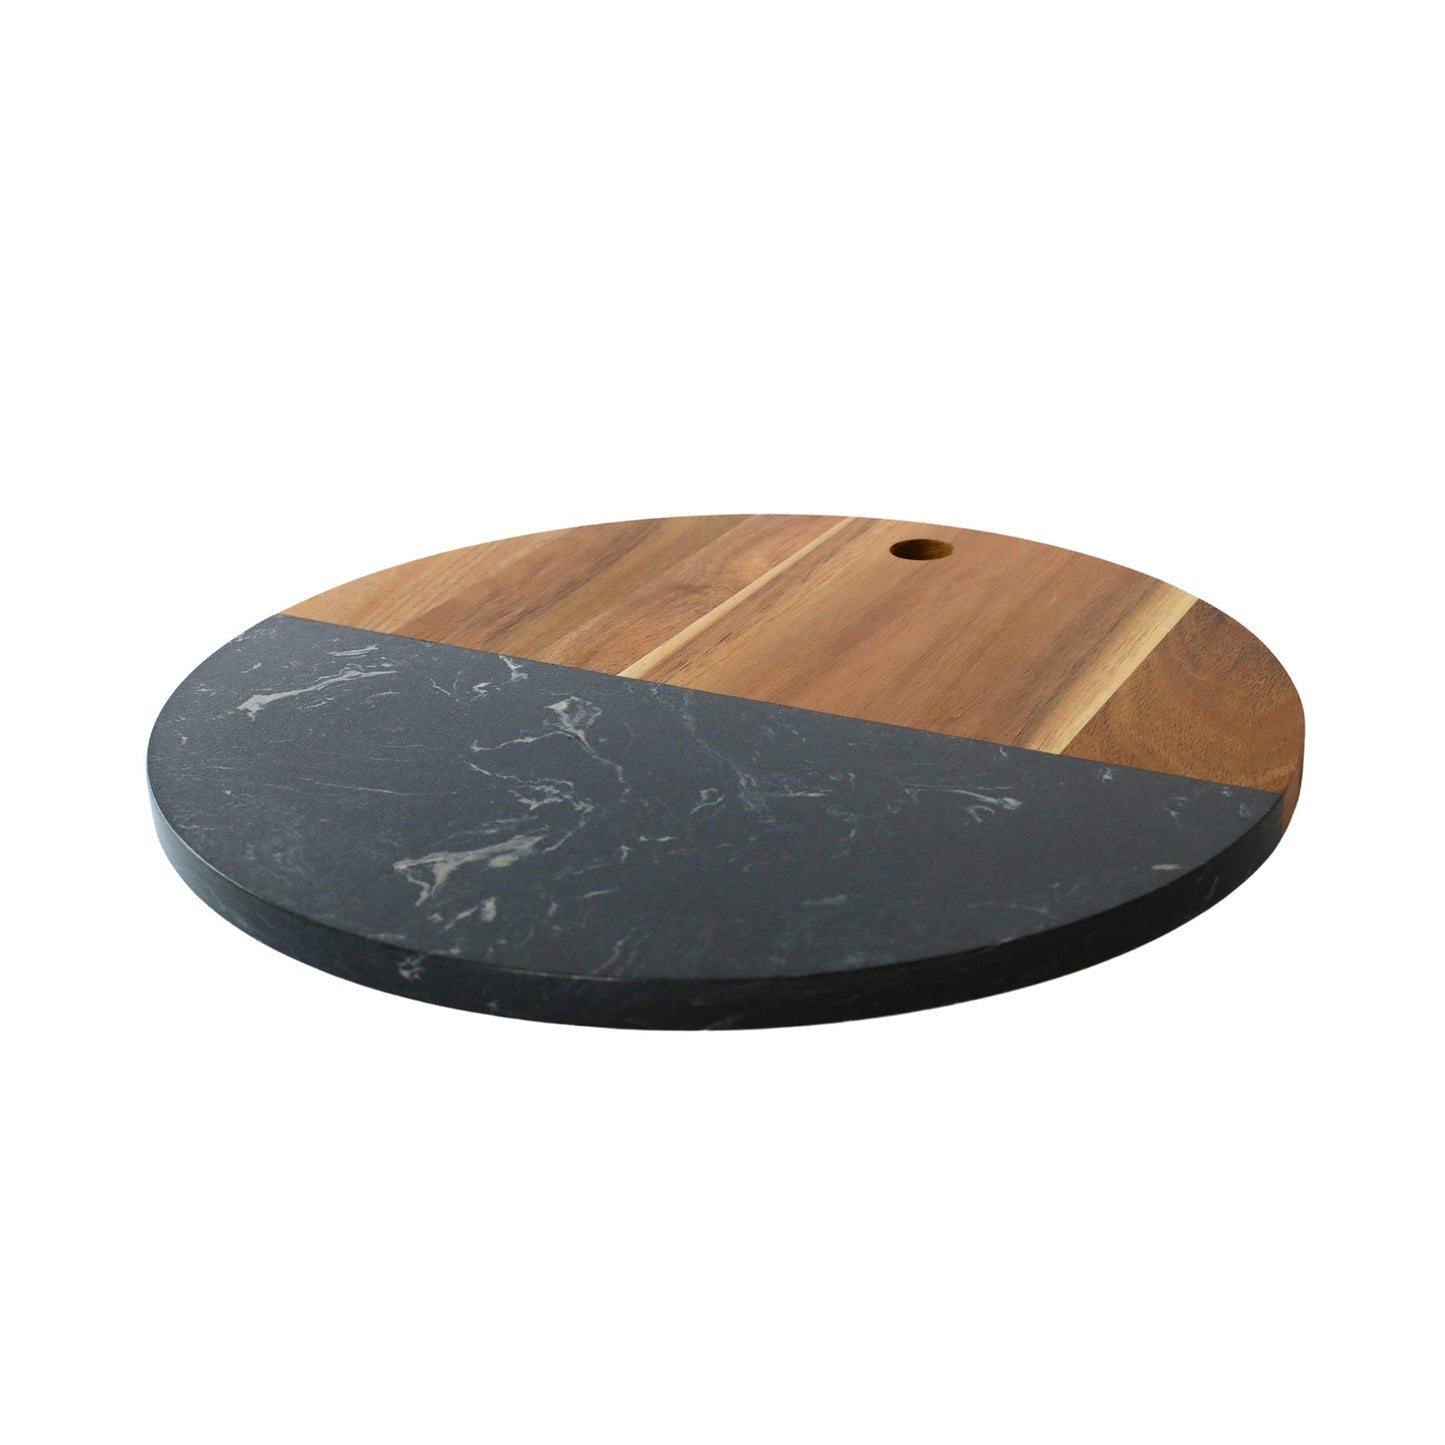 Black Marble and Acacia Wood Round Board - 12" by Creative Gifts